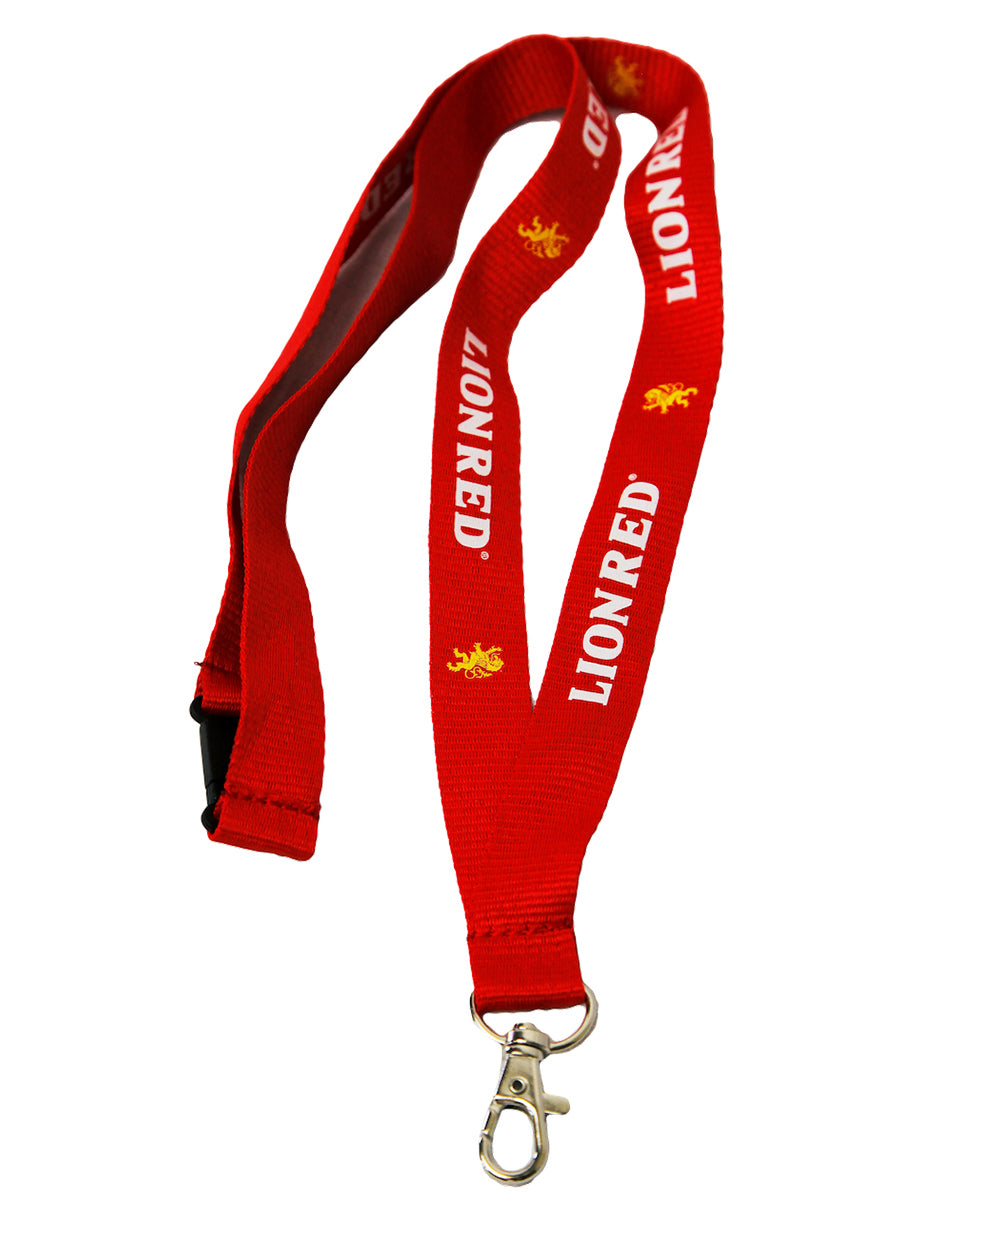 Lion Red Lanyard -  Beer Gear Apparel & Merchandise - Speights - Lion Red - VB - Tokyo Dy merch